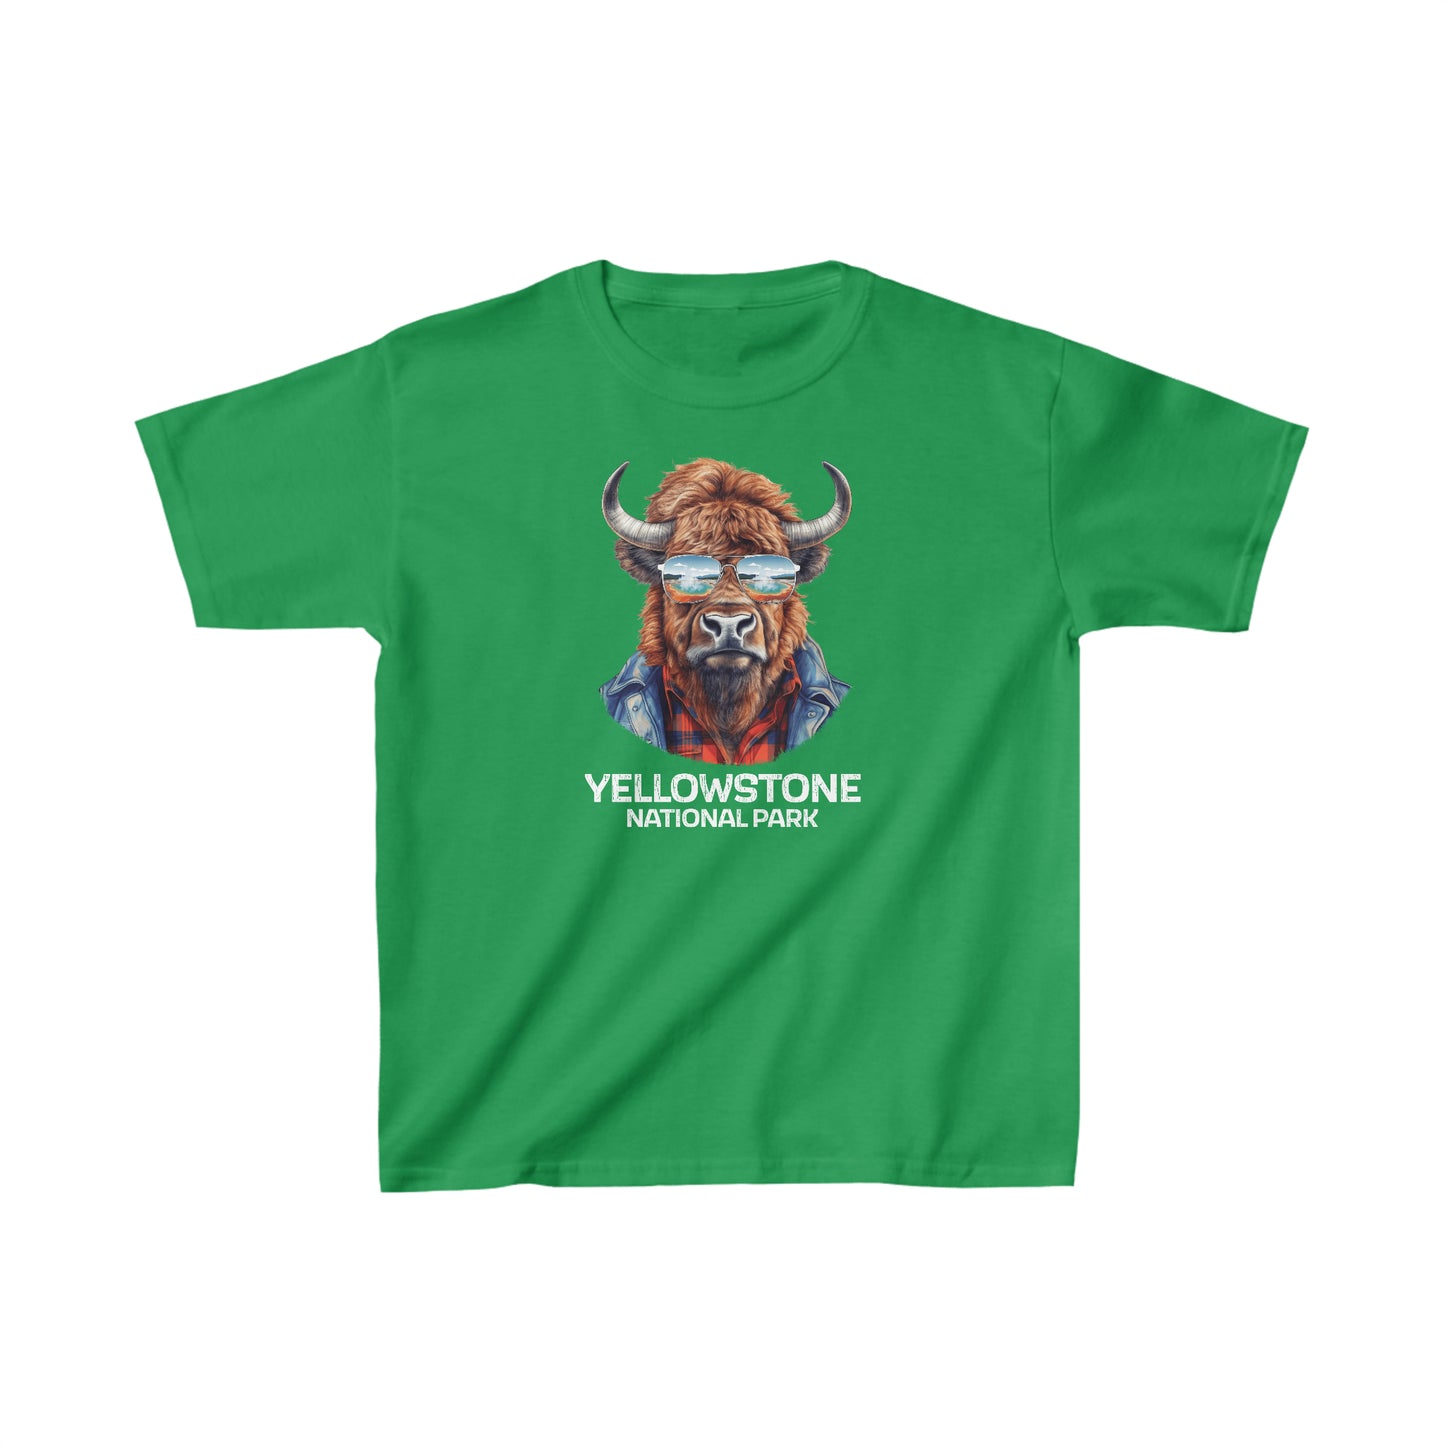 Yellowstone National Park Child T-Shirt - Cool Bison